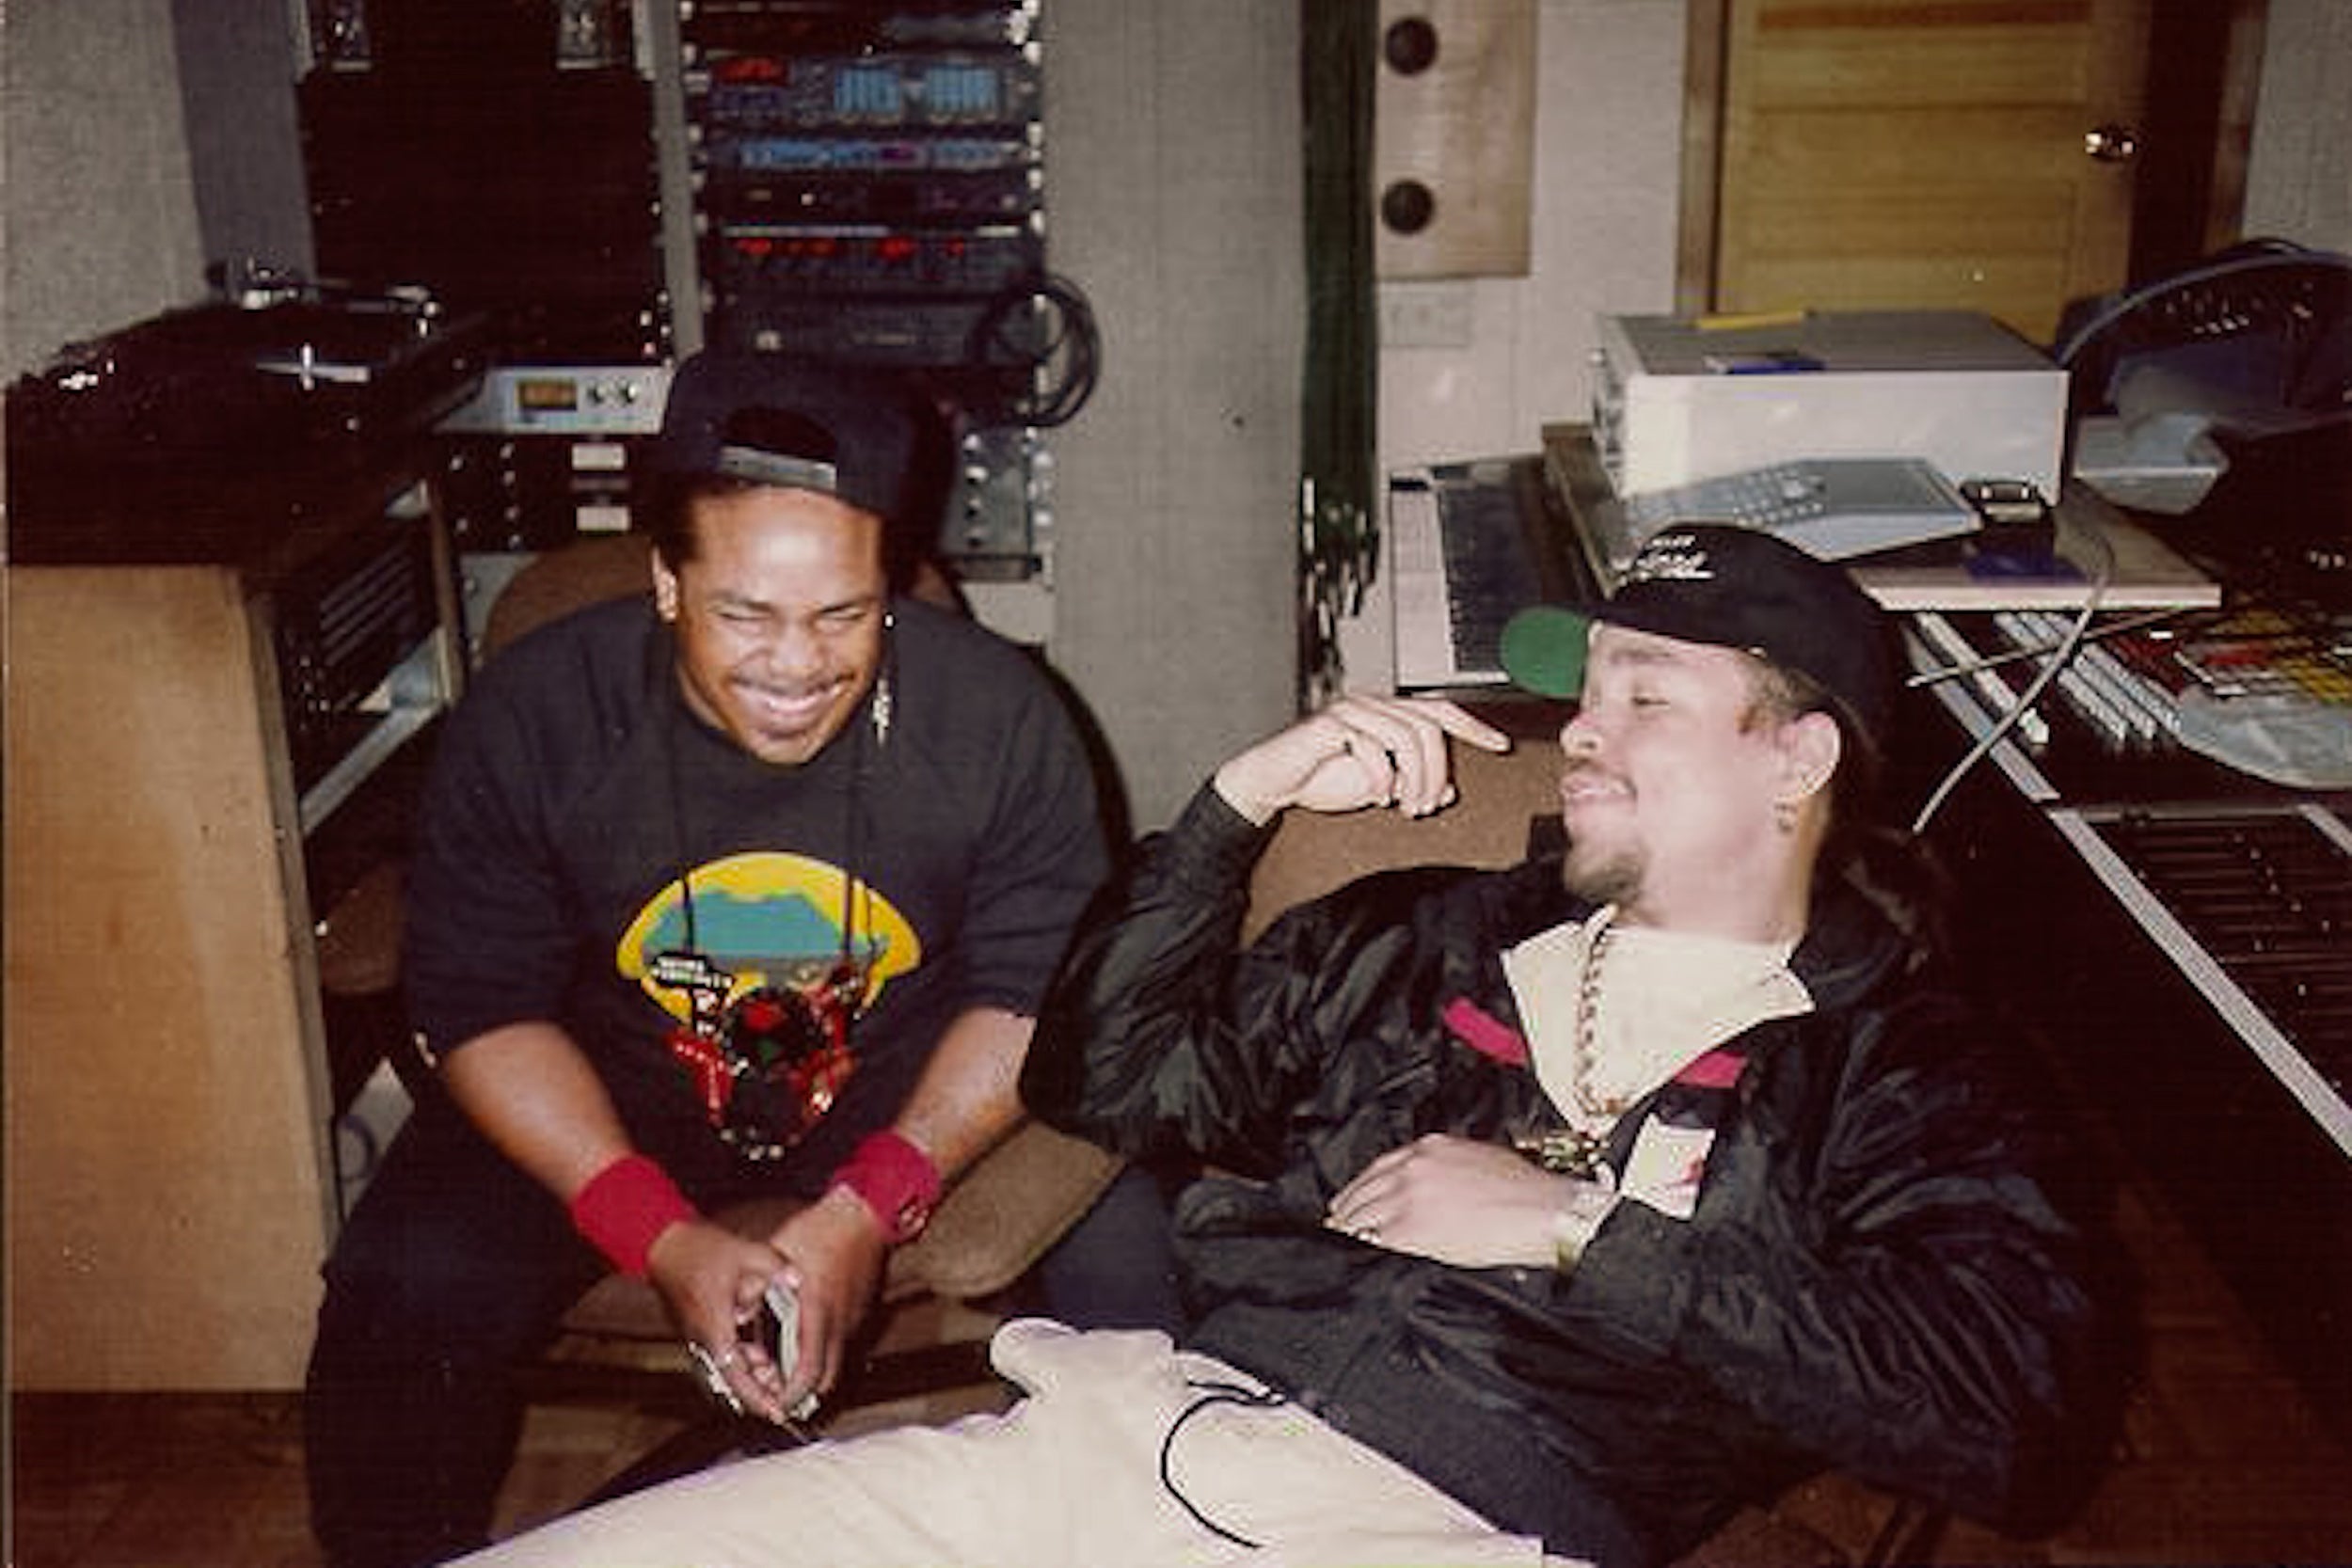 Ice T and Afrika Islam laugh together in studio in image from 1980s.